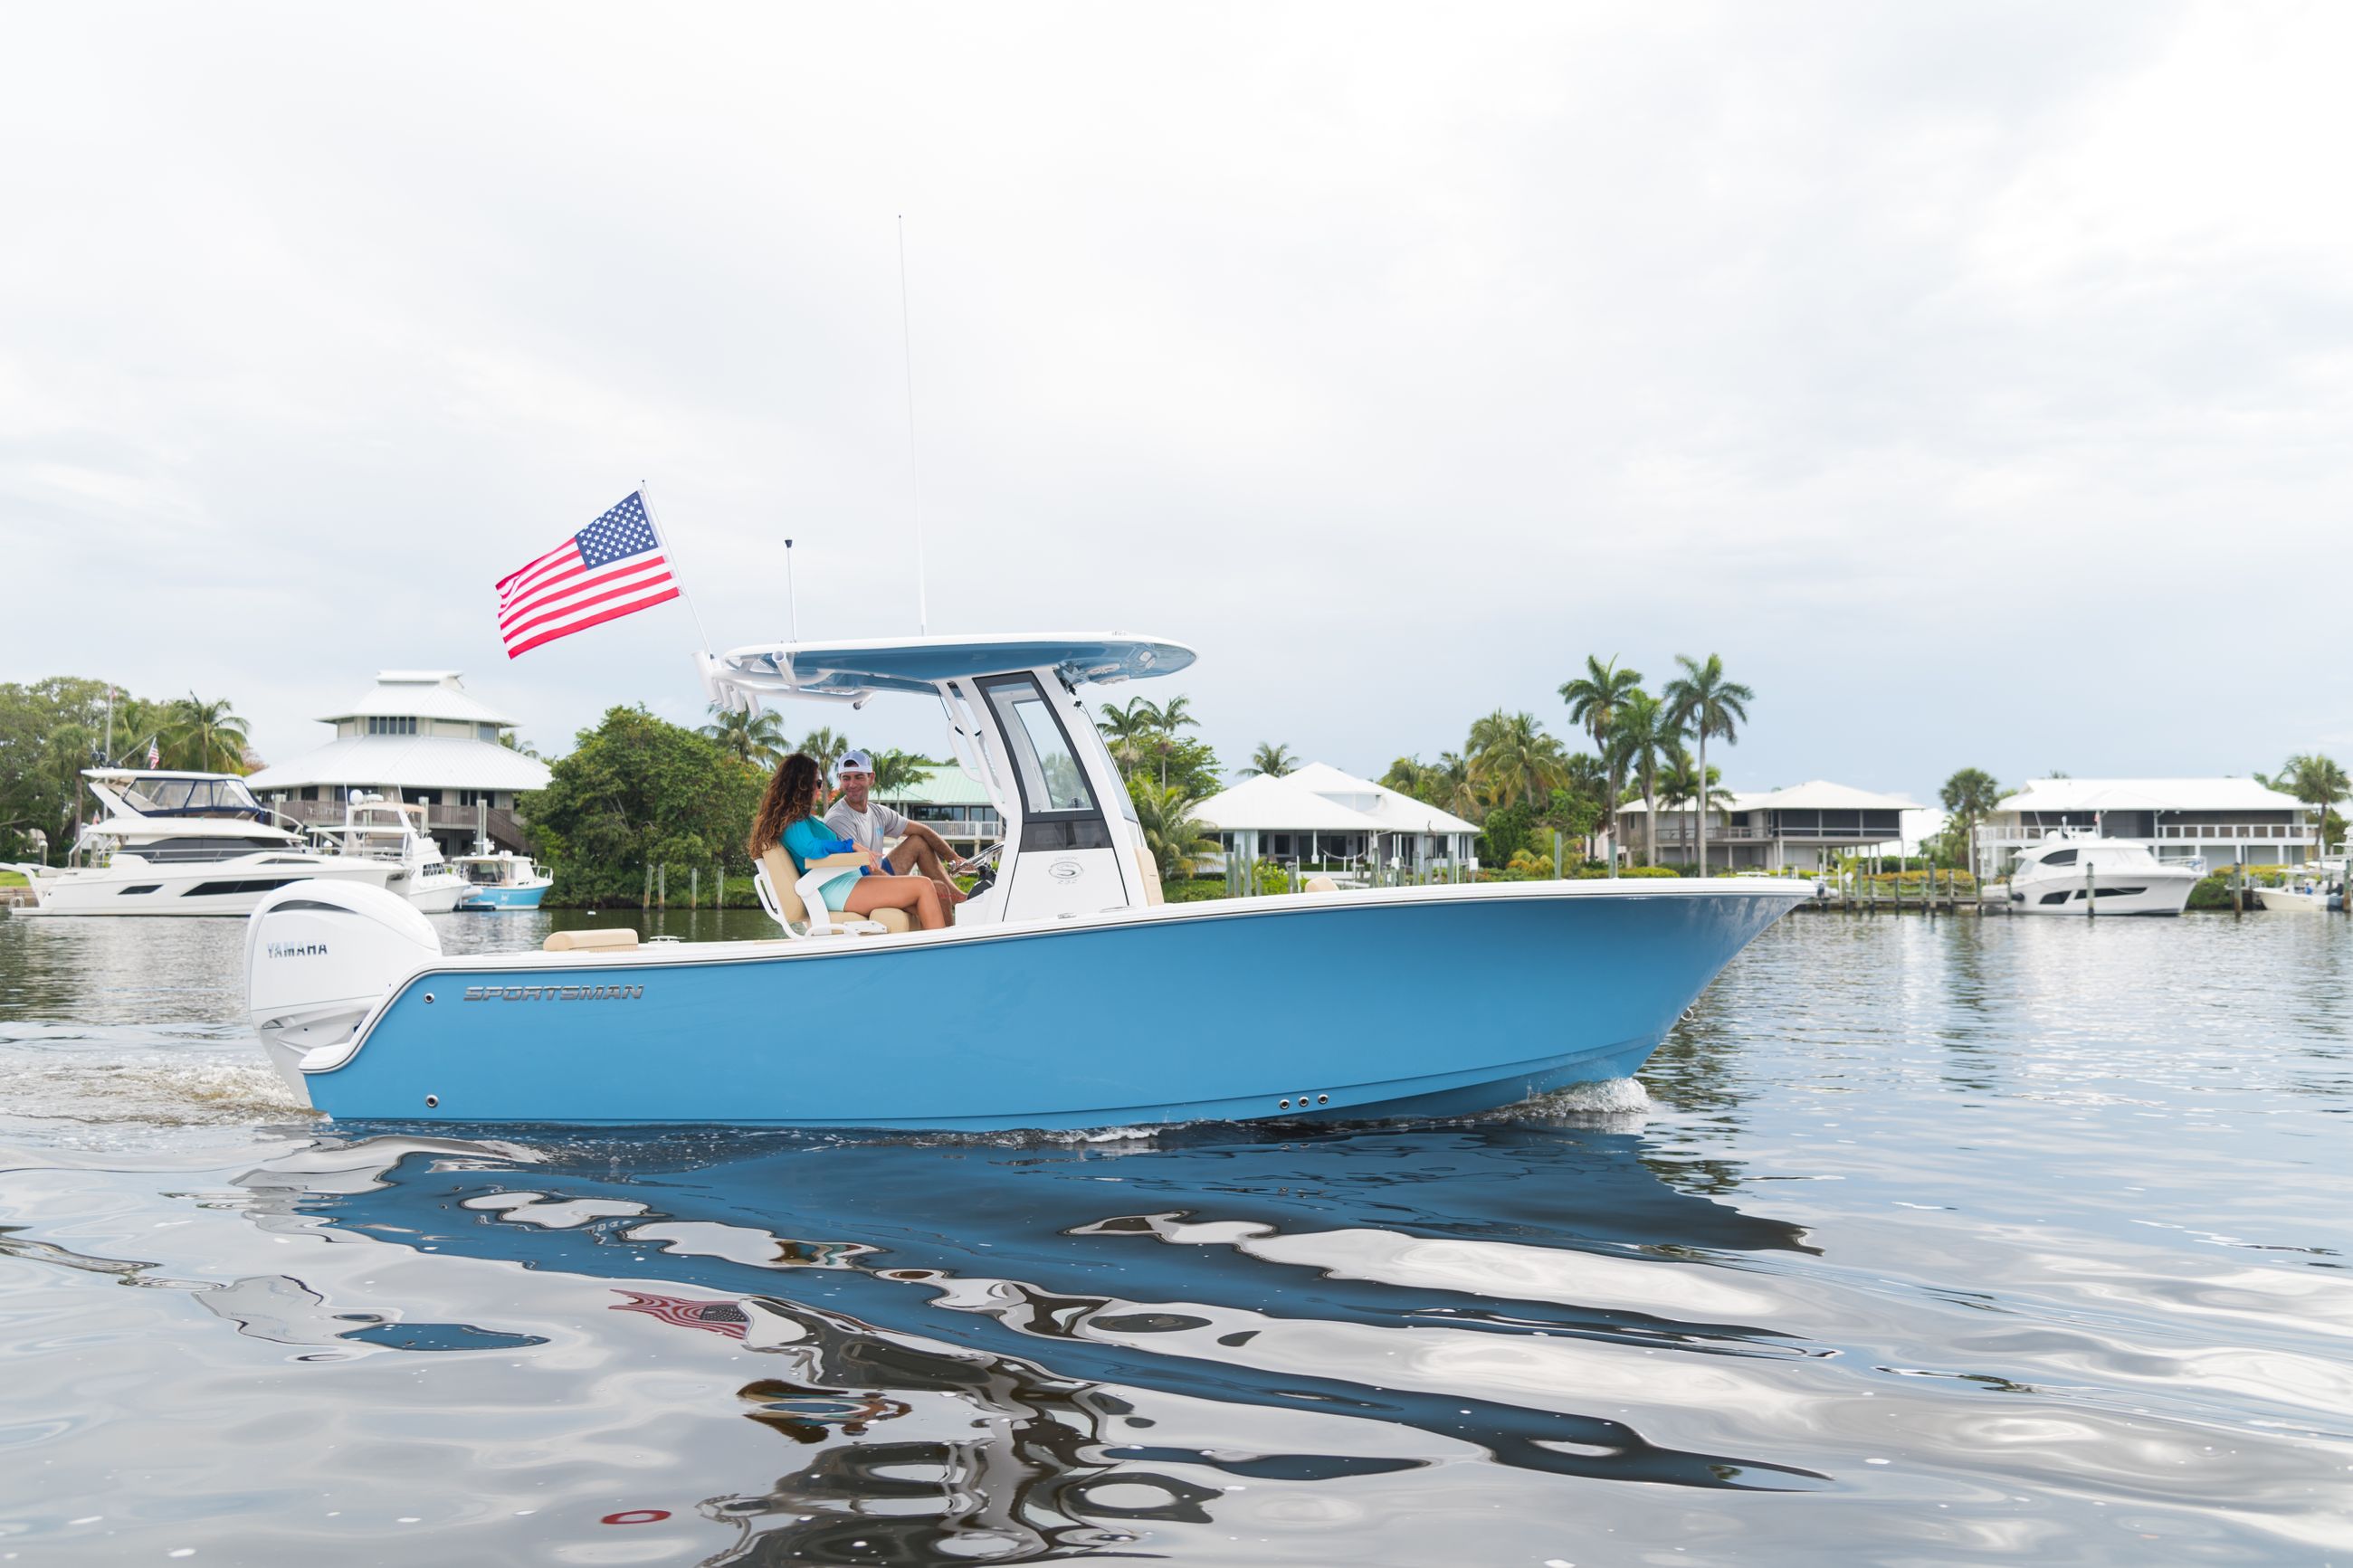 Image of a Sportsman Boat on the water.